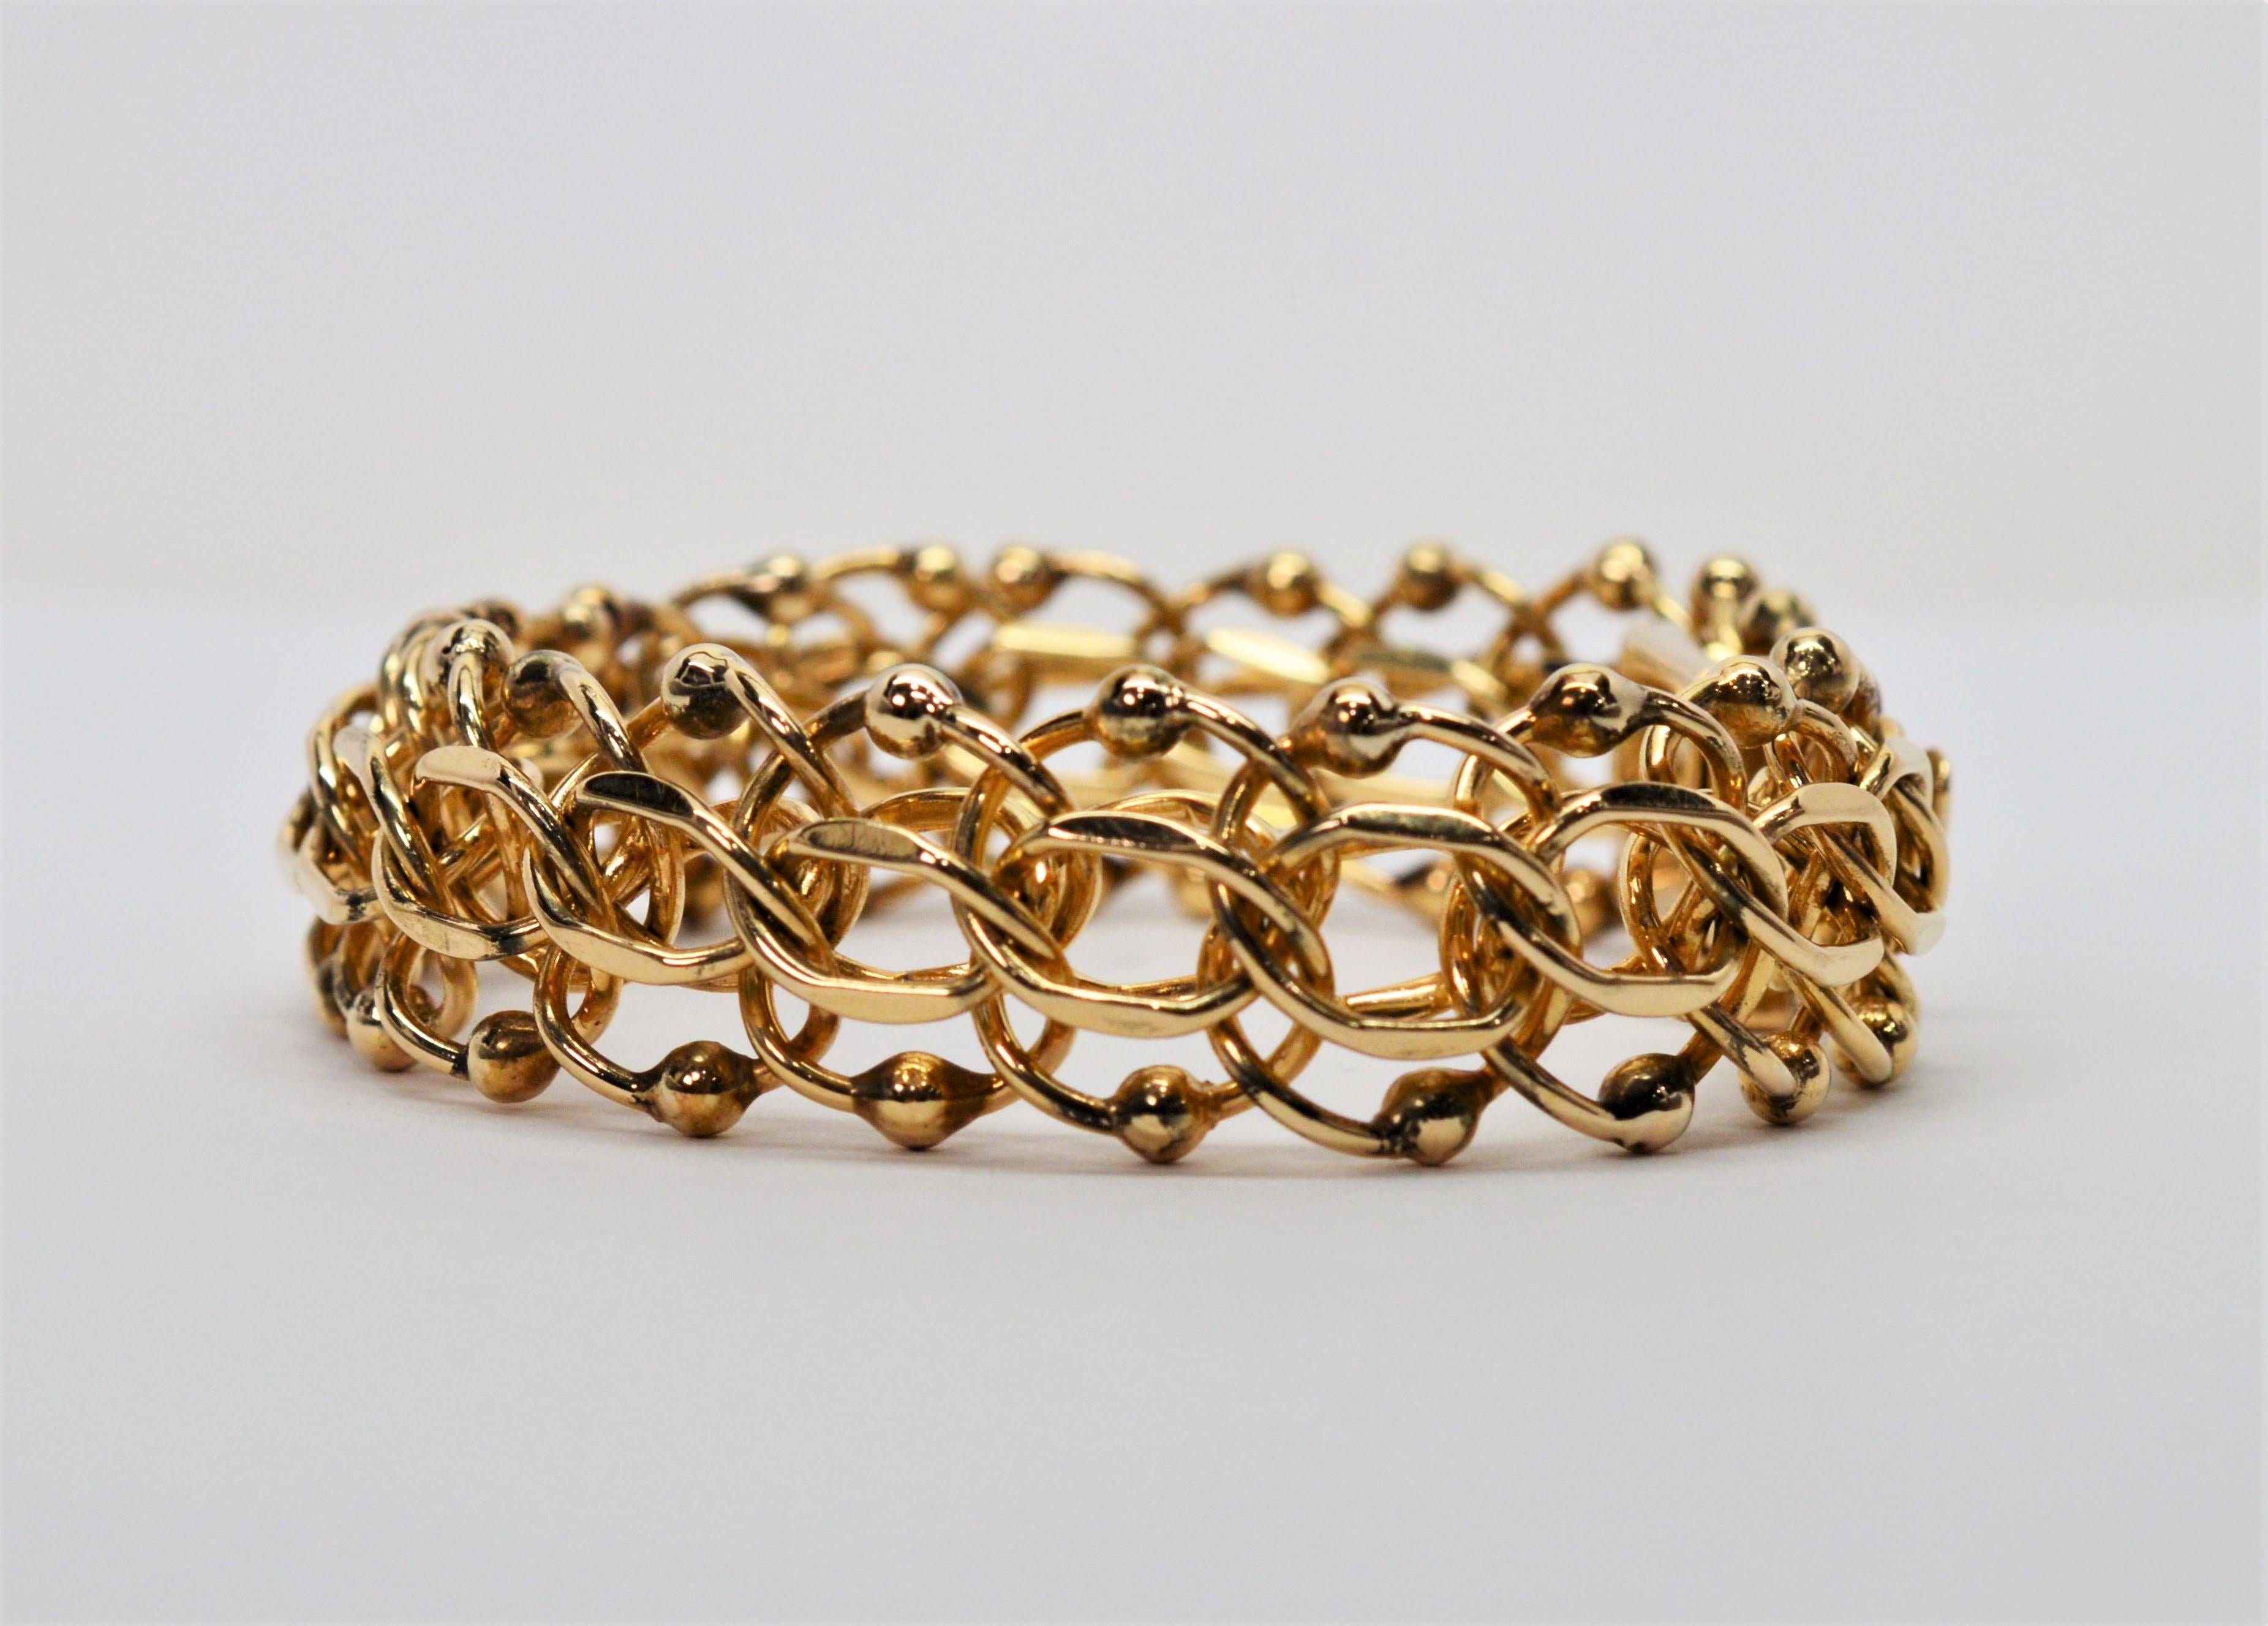 Retro Open Link Chain 14 Karat Yellow Gold Bracelet In Excellent Condition For Sale In Mount Kisco, NY